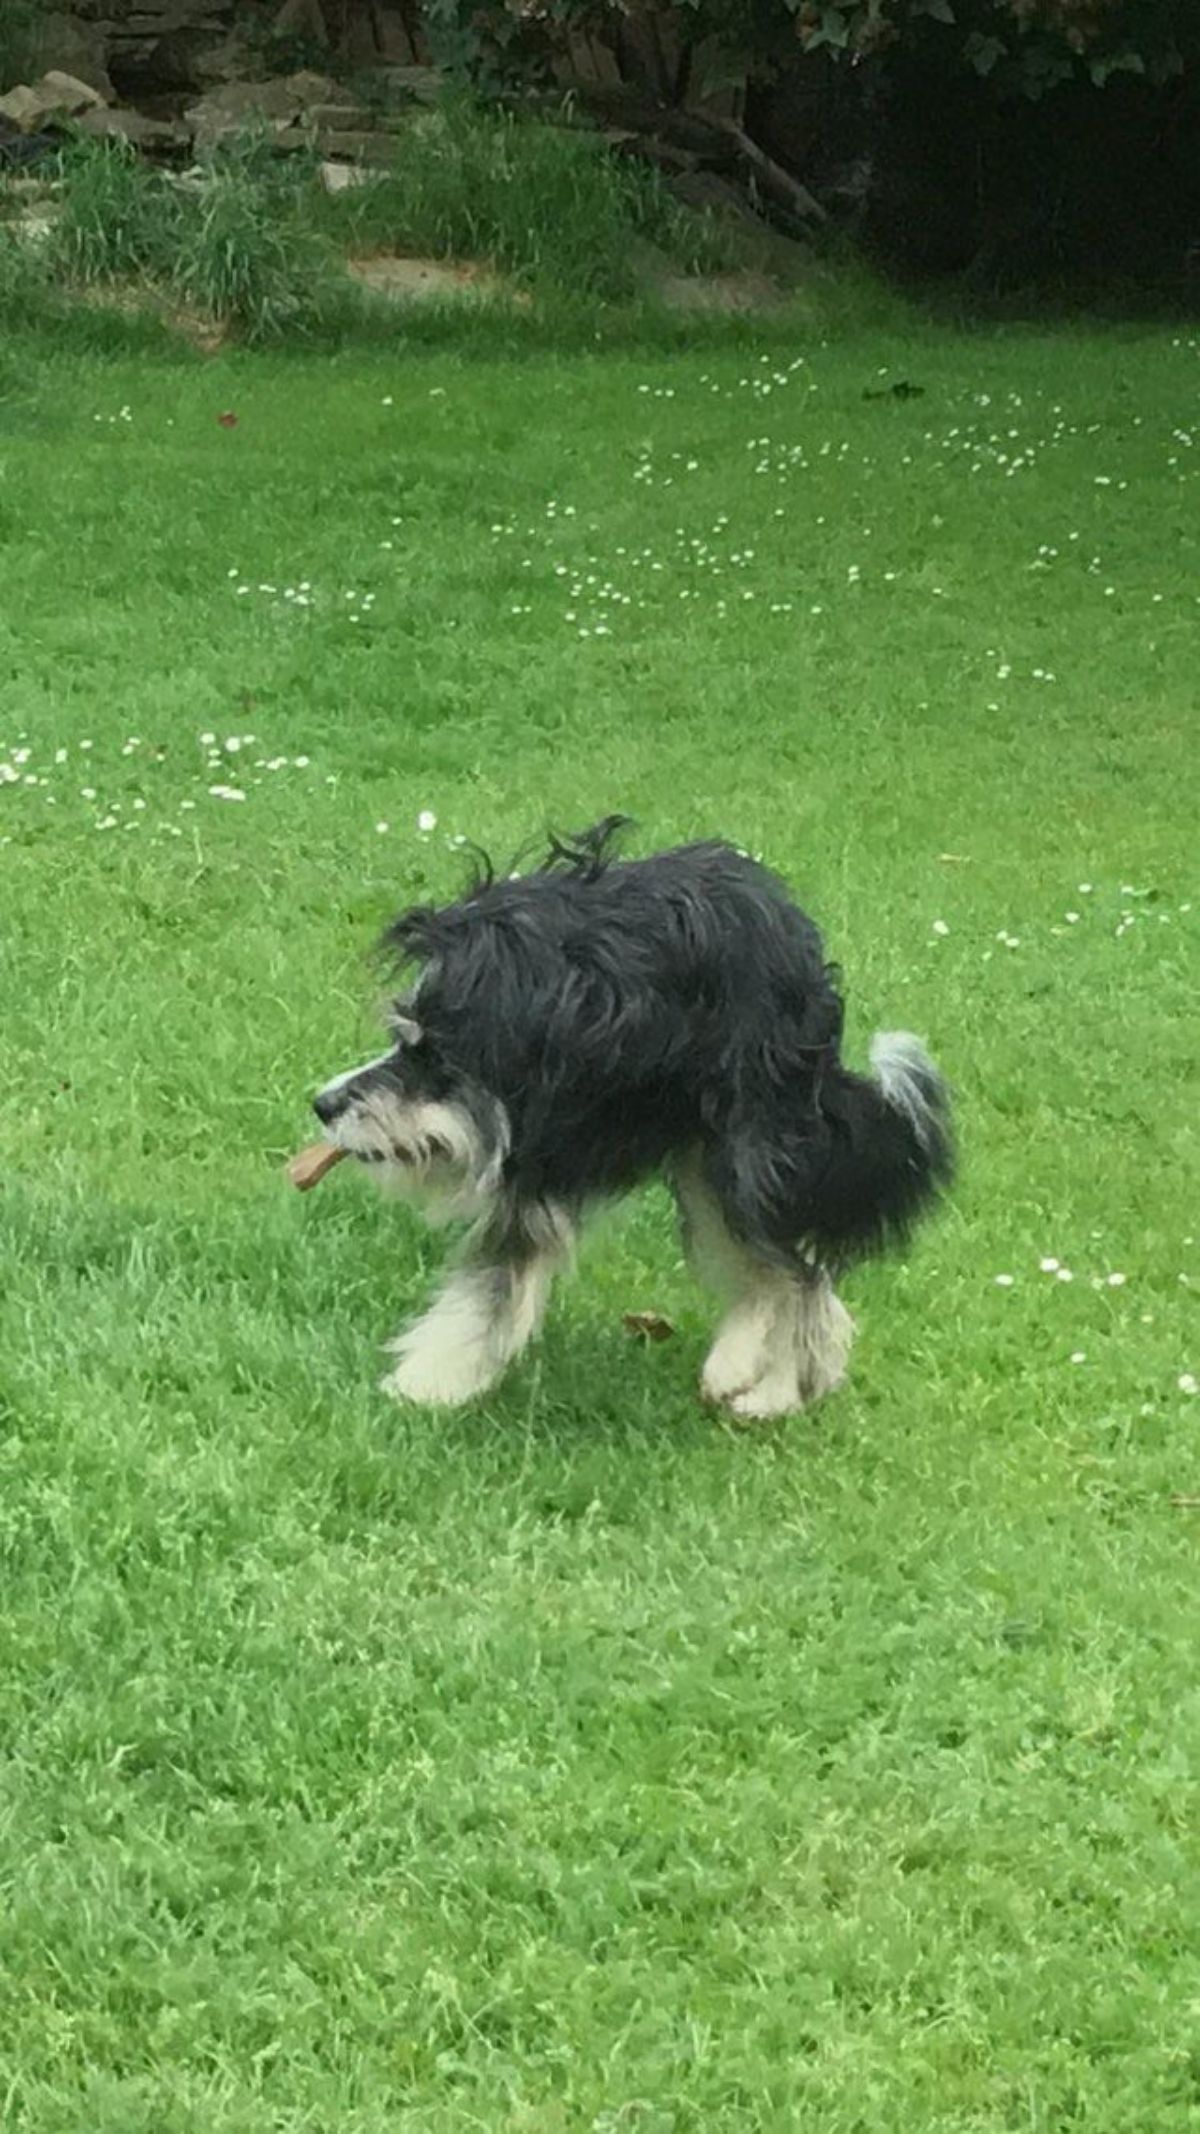 panoramic fail of black and white fluffy dog with 2 legs and a very short body standing on grass